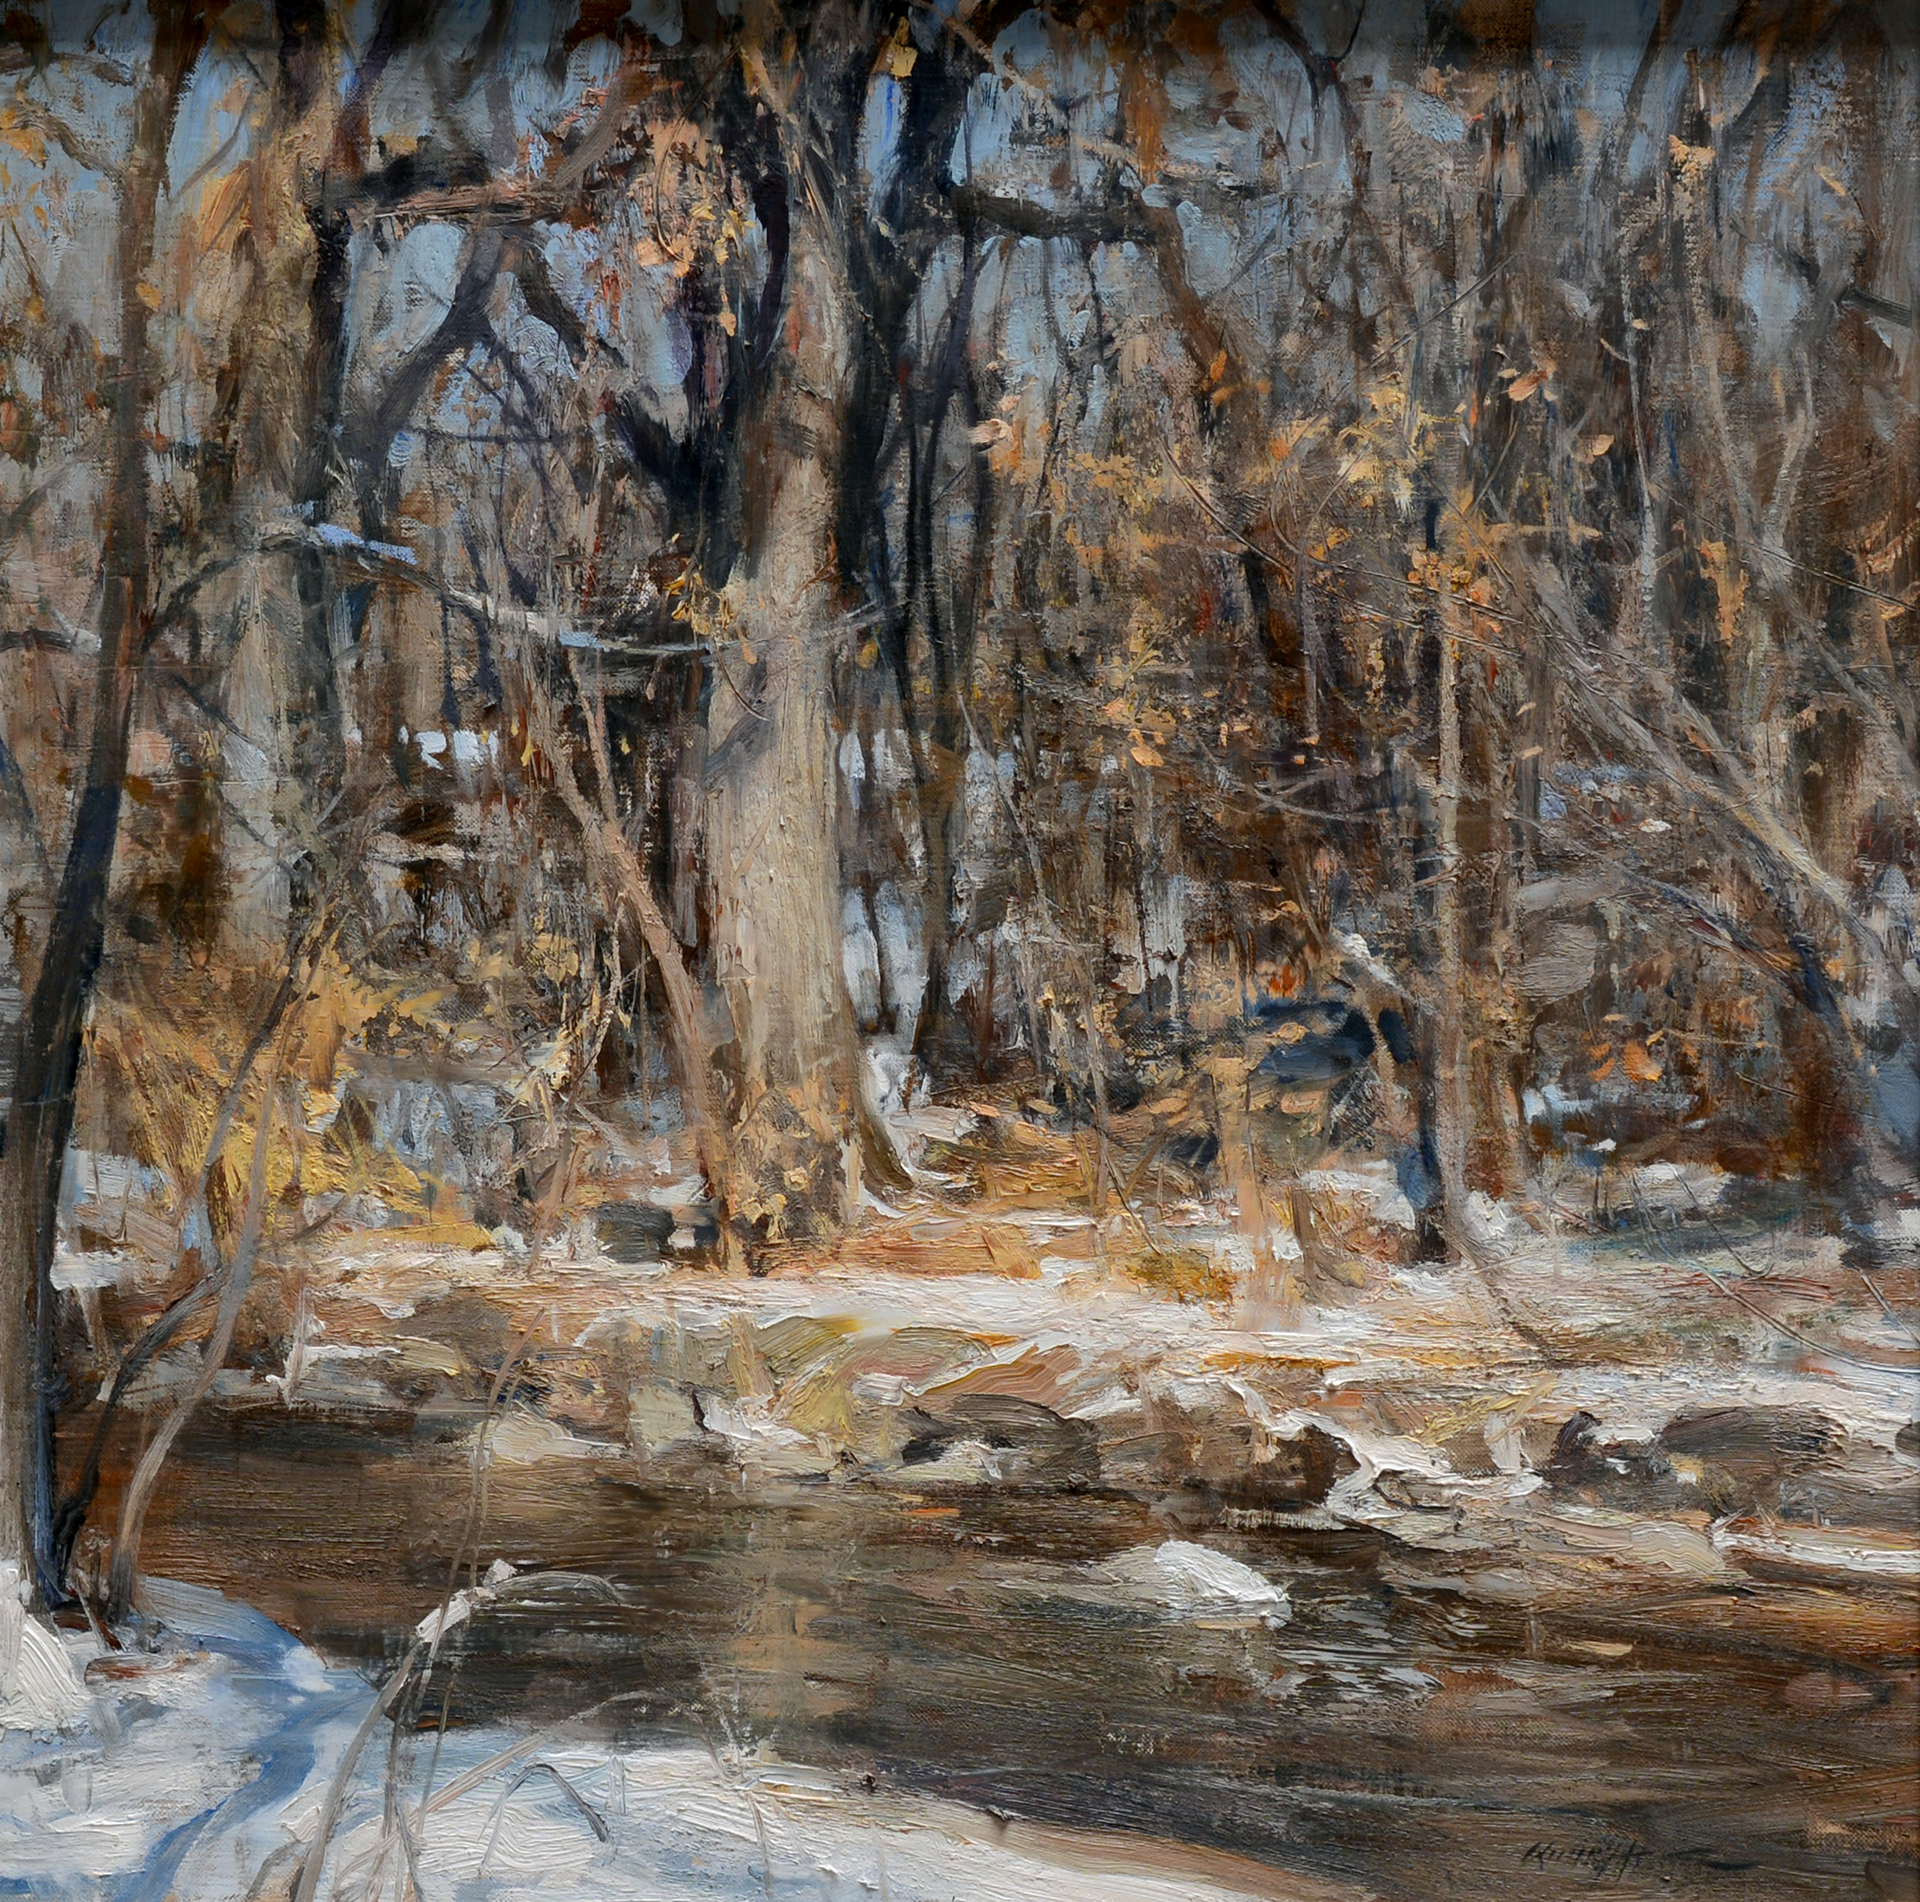 Bank of Cherry Creek by Quang Ho